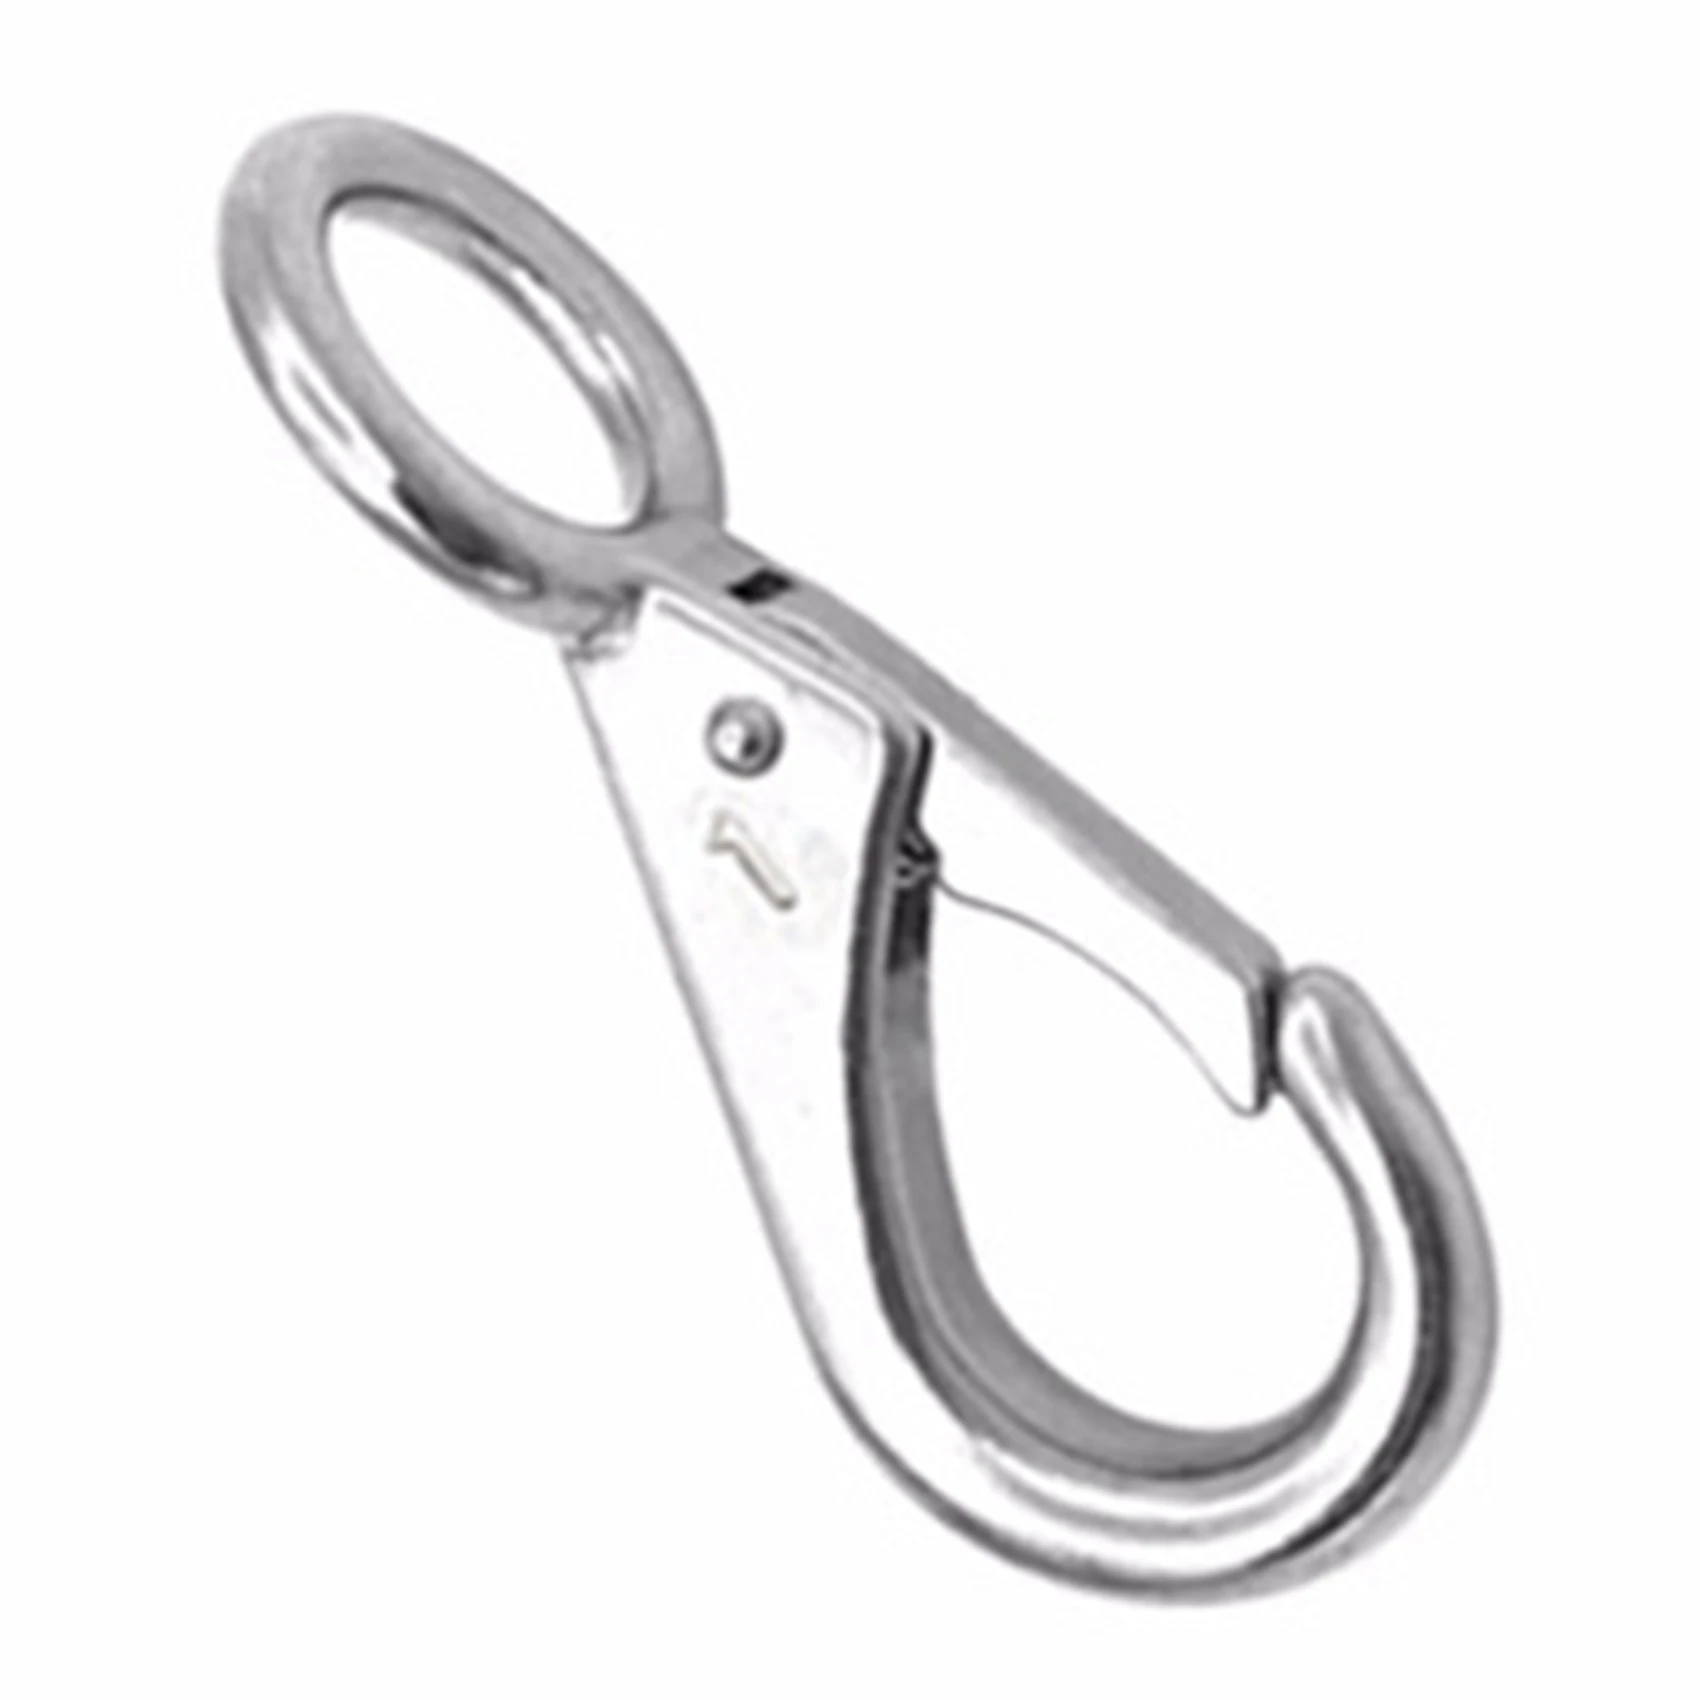 

2Pcs Stainless Steel 316 Rigid Loaded Fixed Eye Spring Clip Snap Hook Carabiner Marine Hardware Accessories for Boats